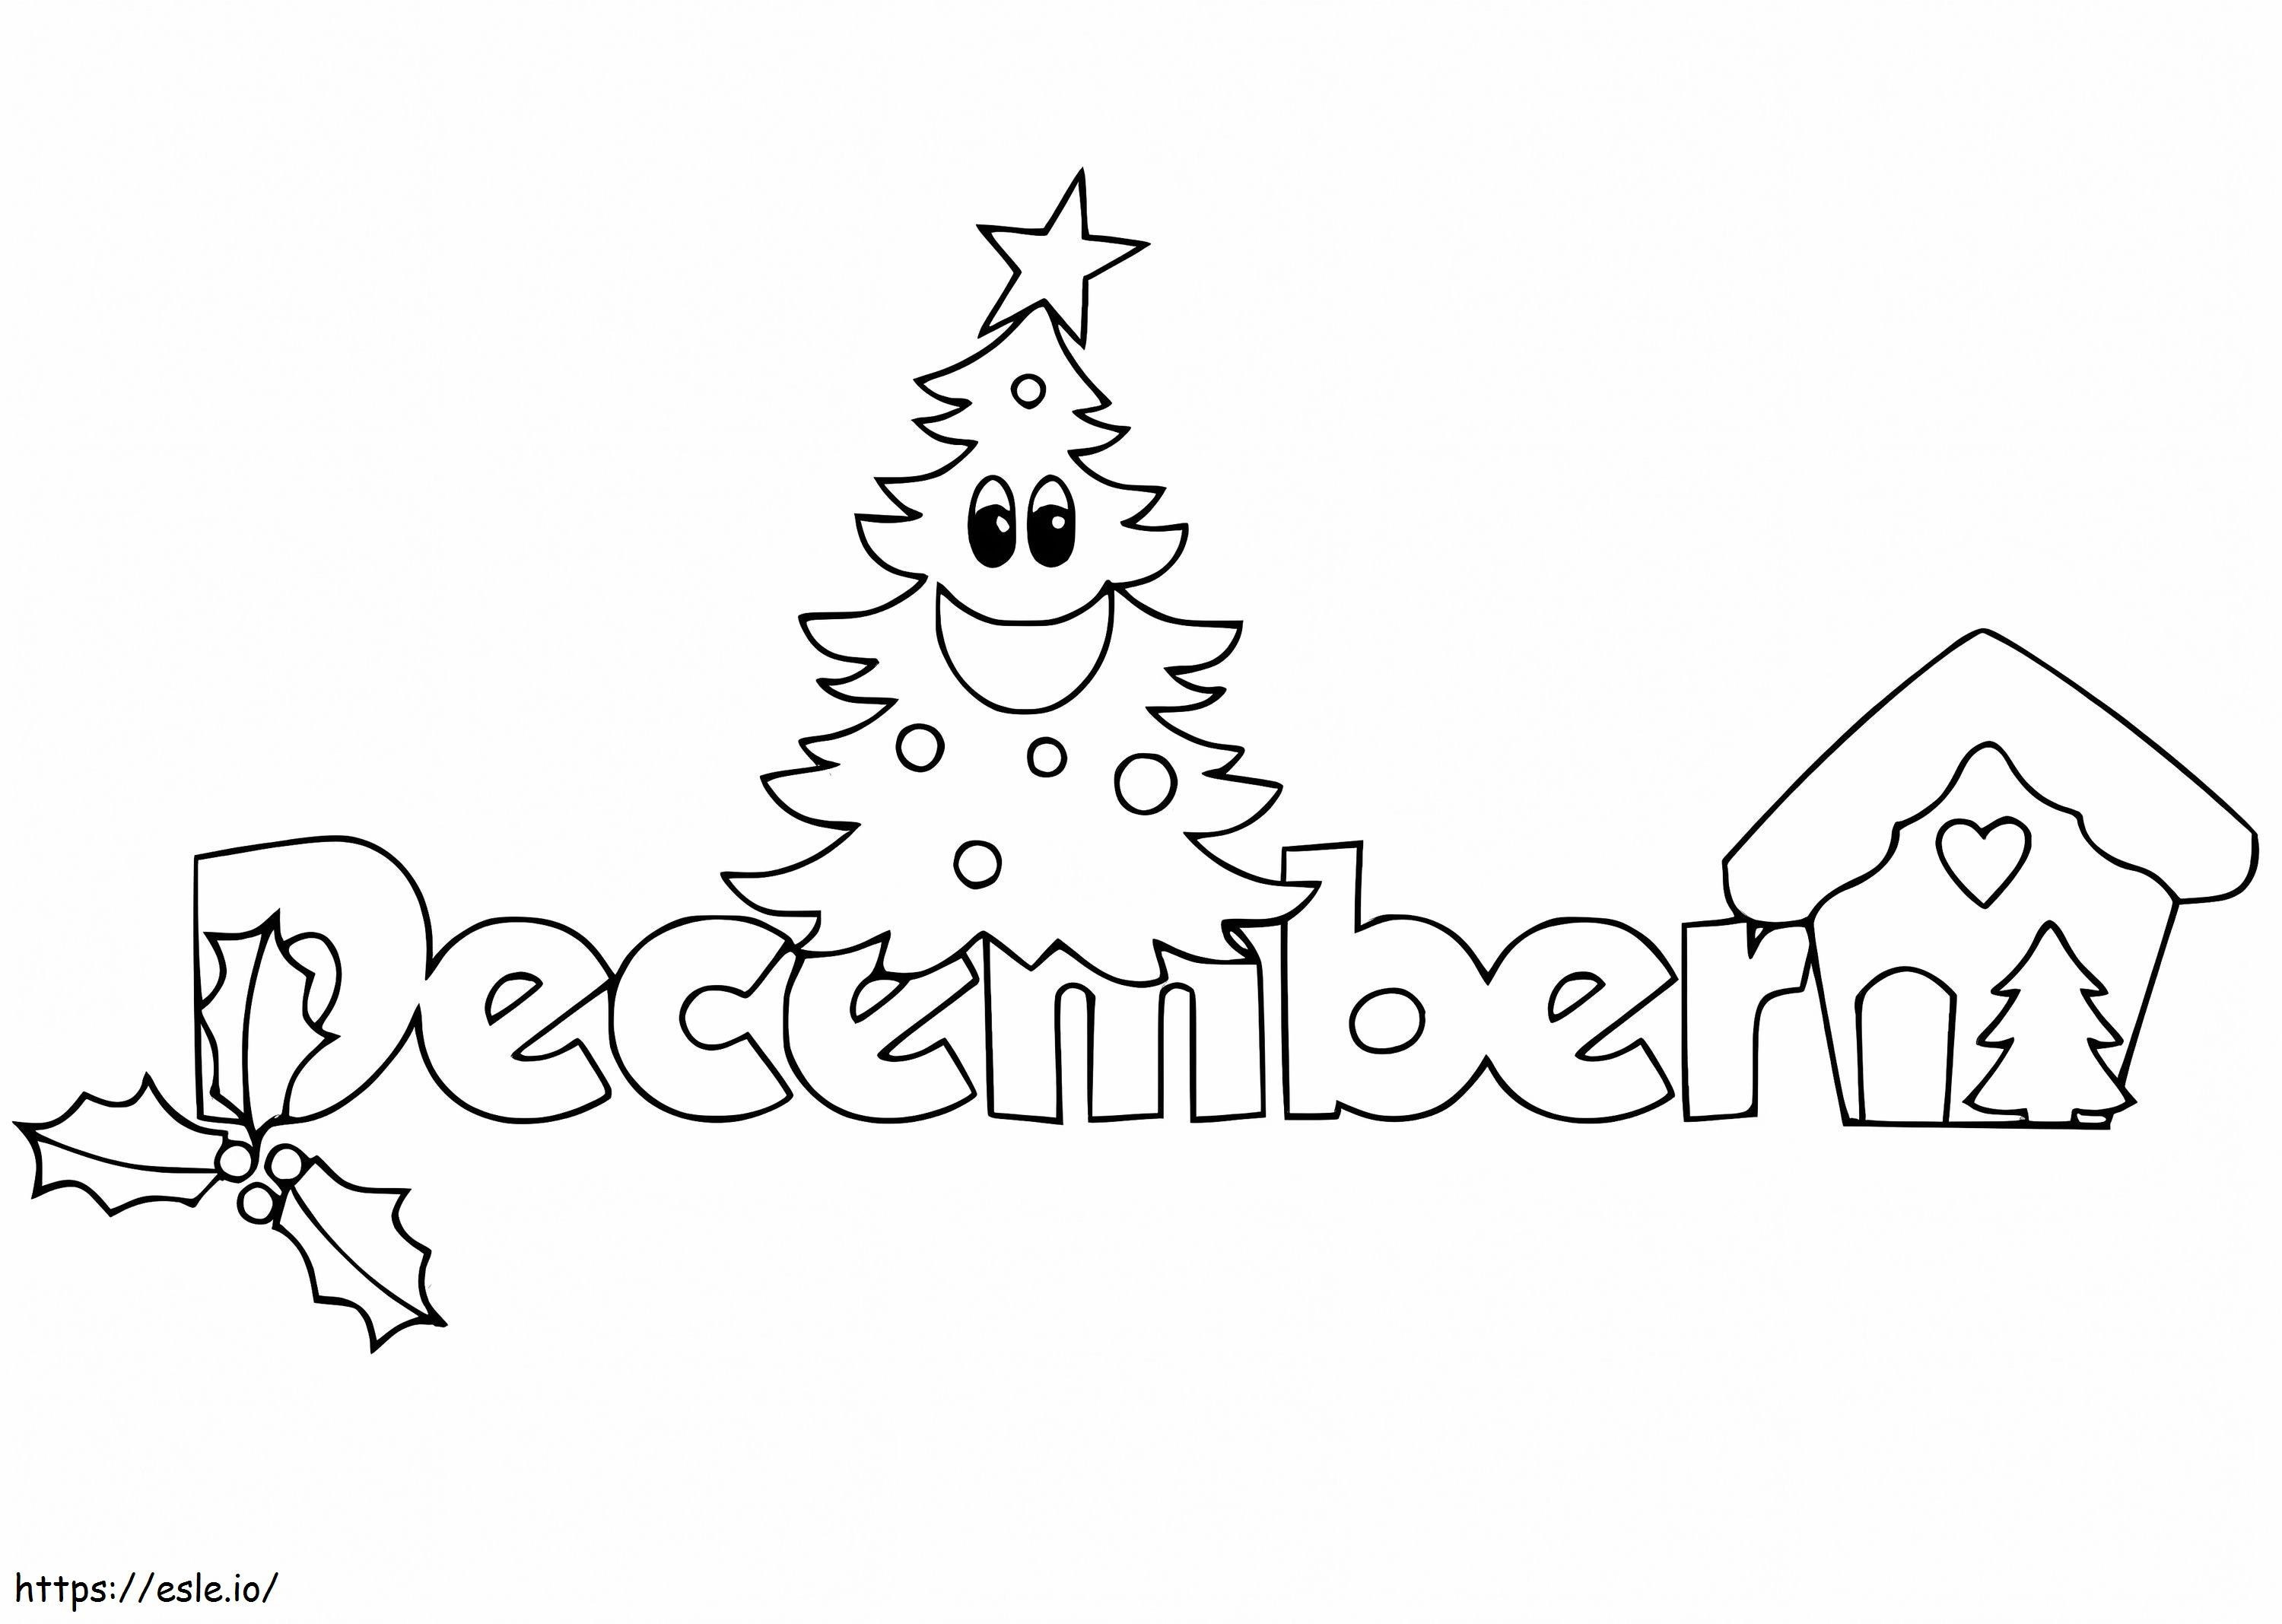 December With Christmas Tree coloring page